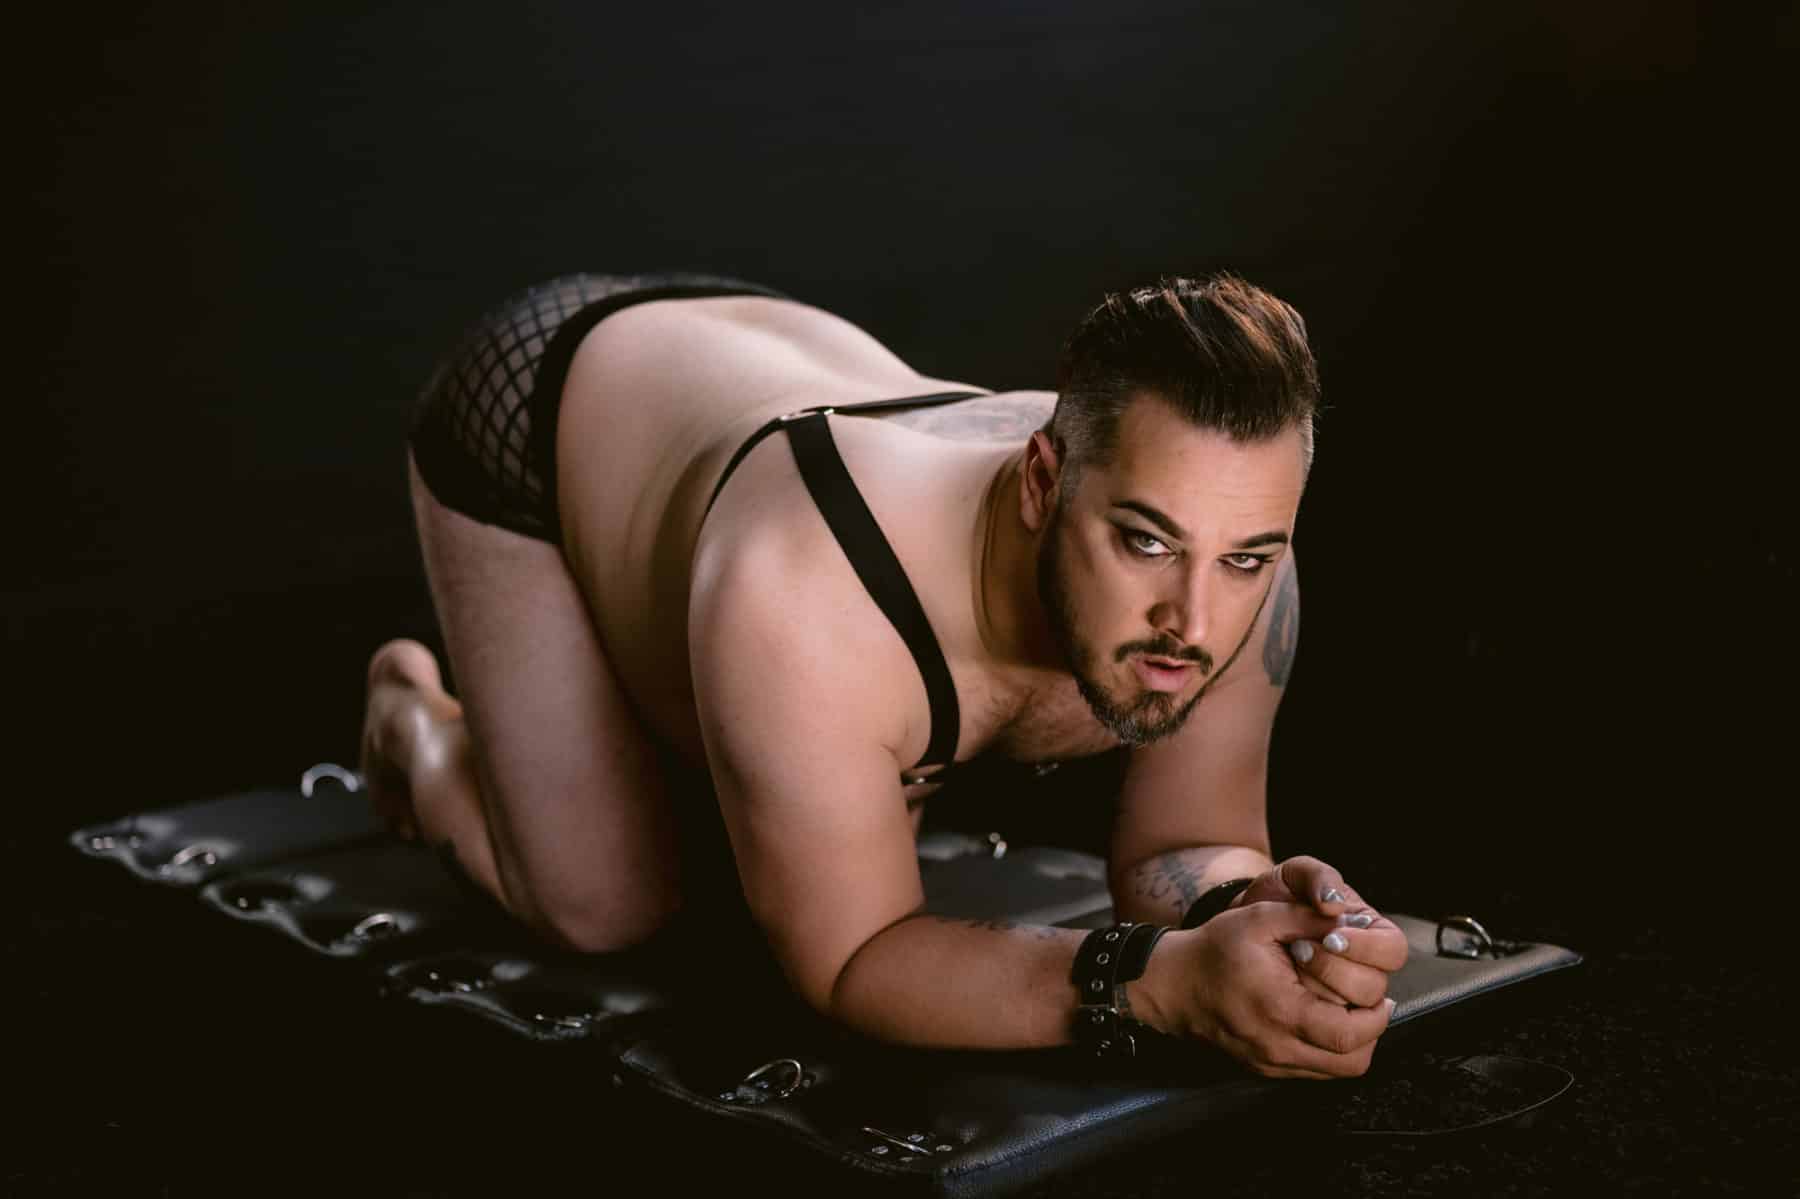 Hot male boudoir, bdsm sub position, hands and knees, strapped to board